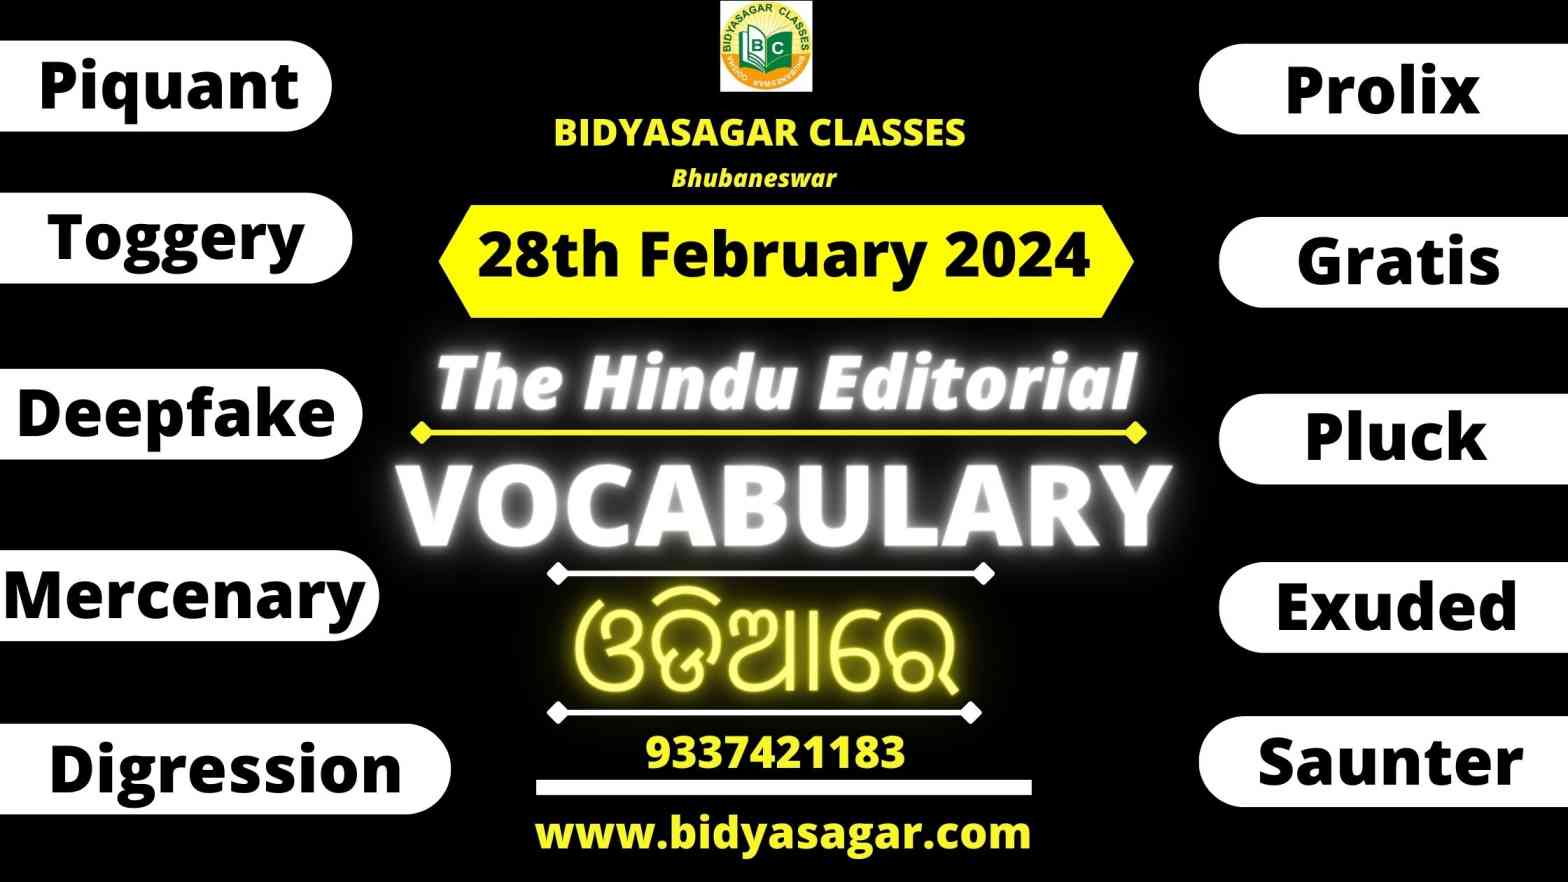 The Hindu Editorial Vocabulary of 28th February 2024